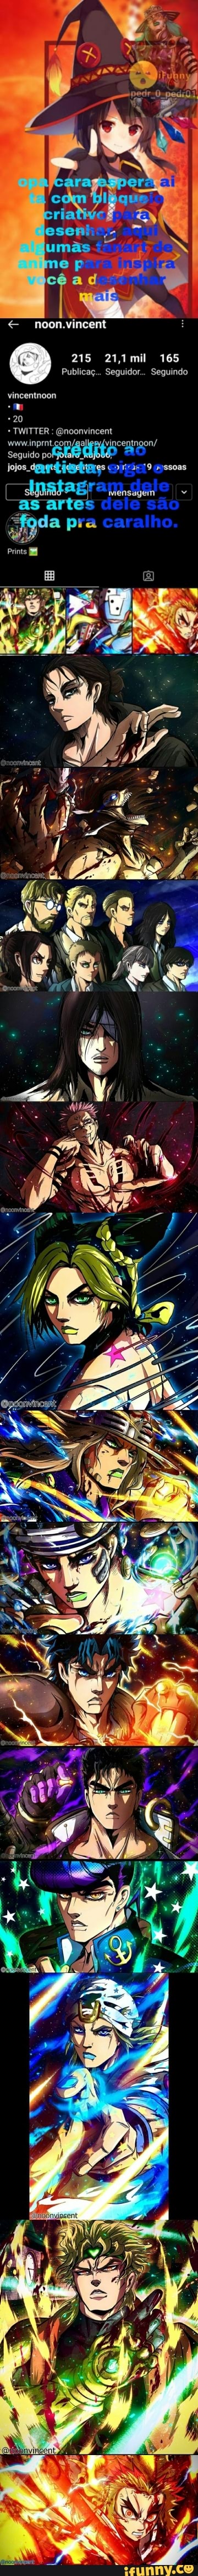 DIO by noonvincent